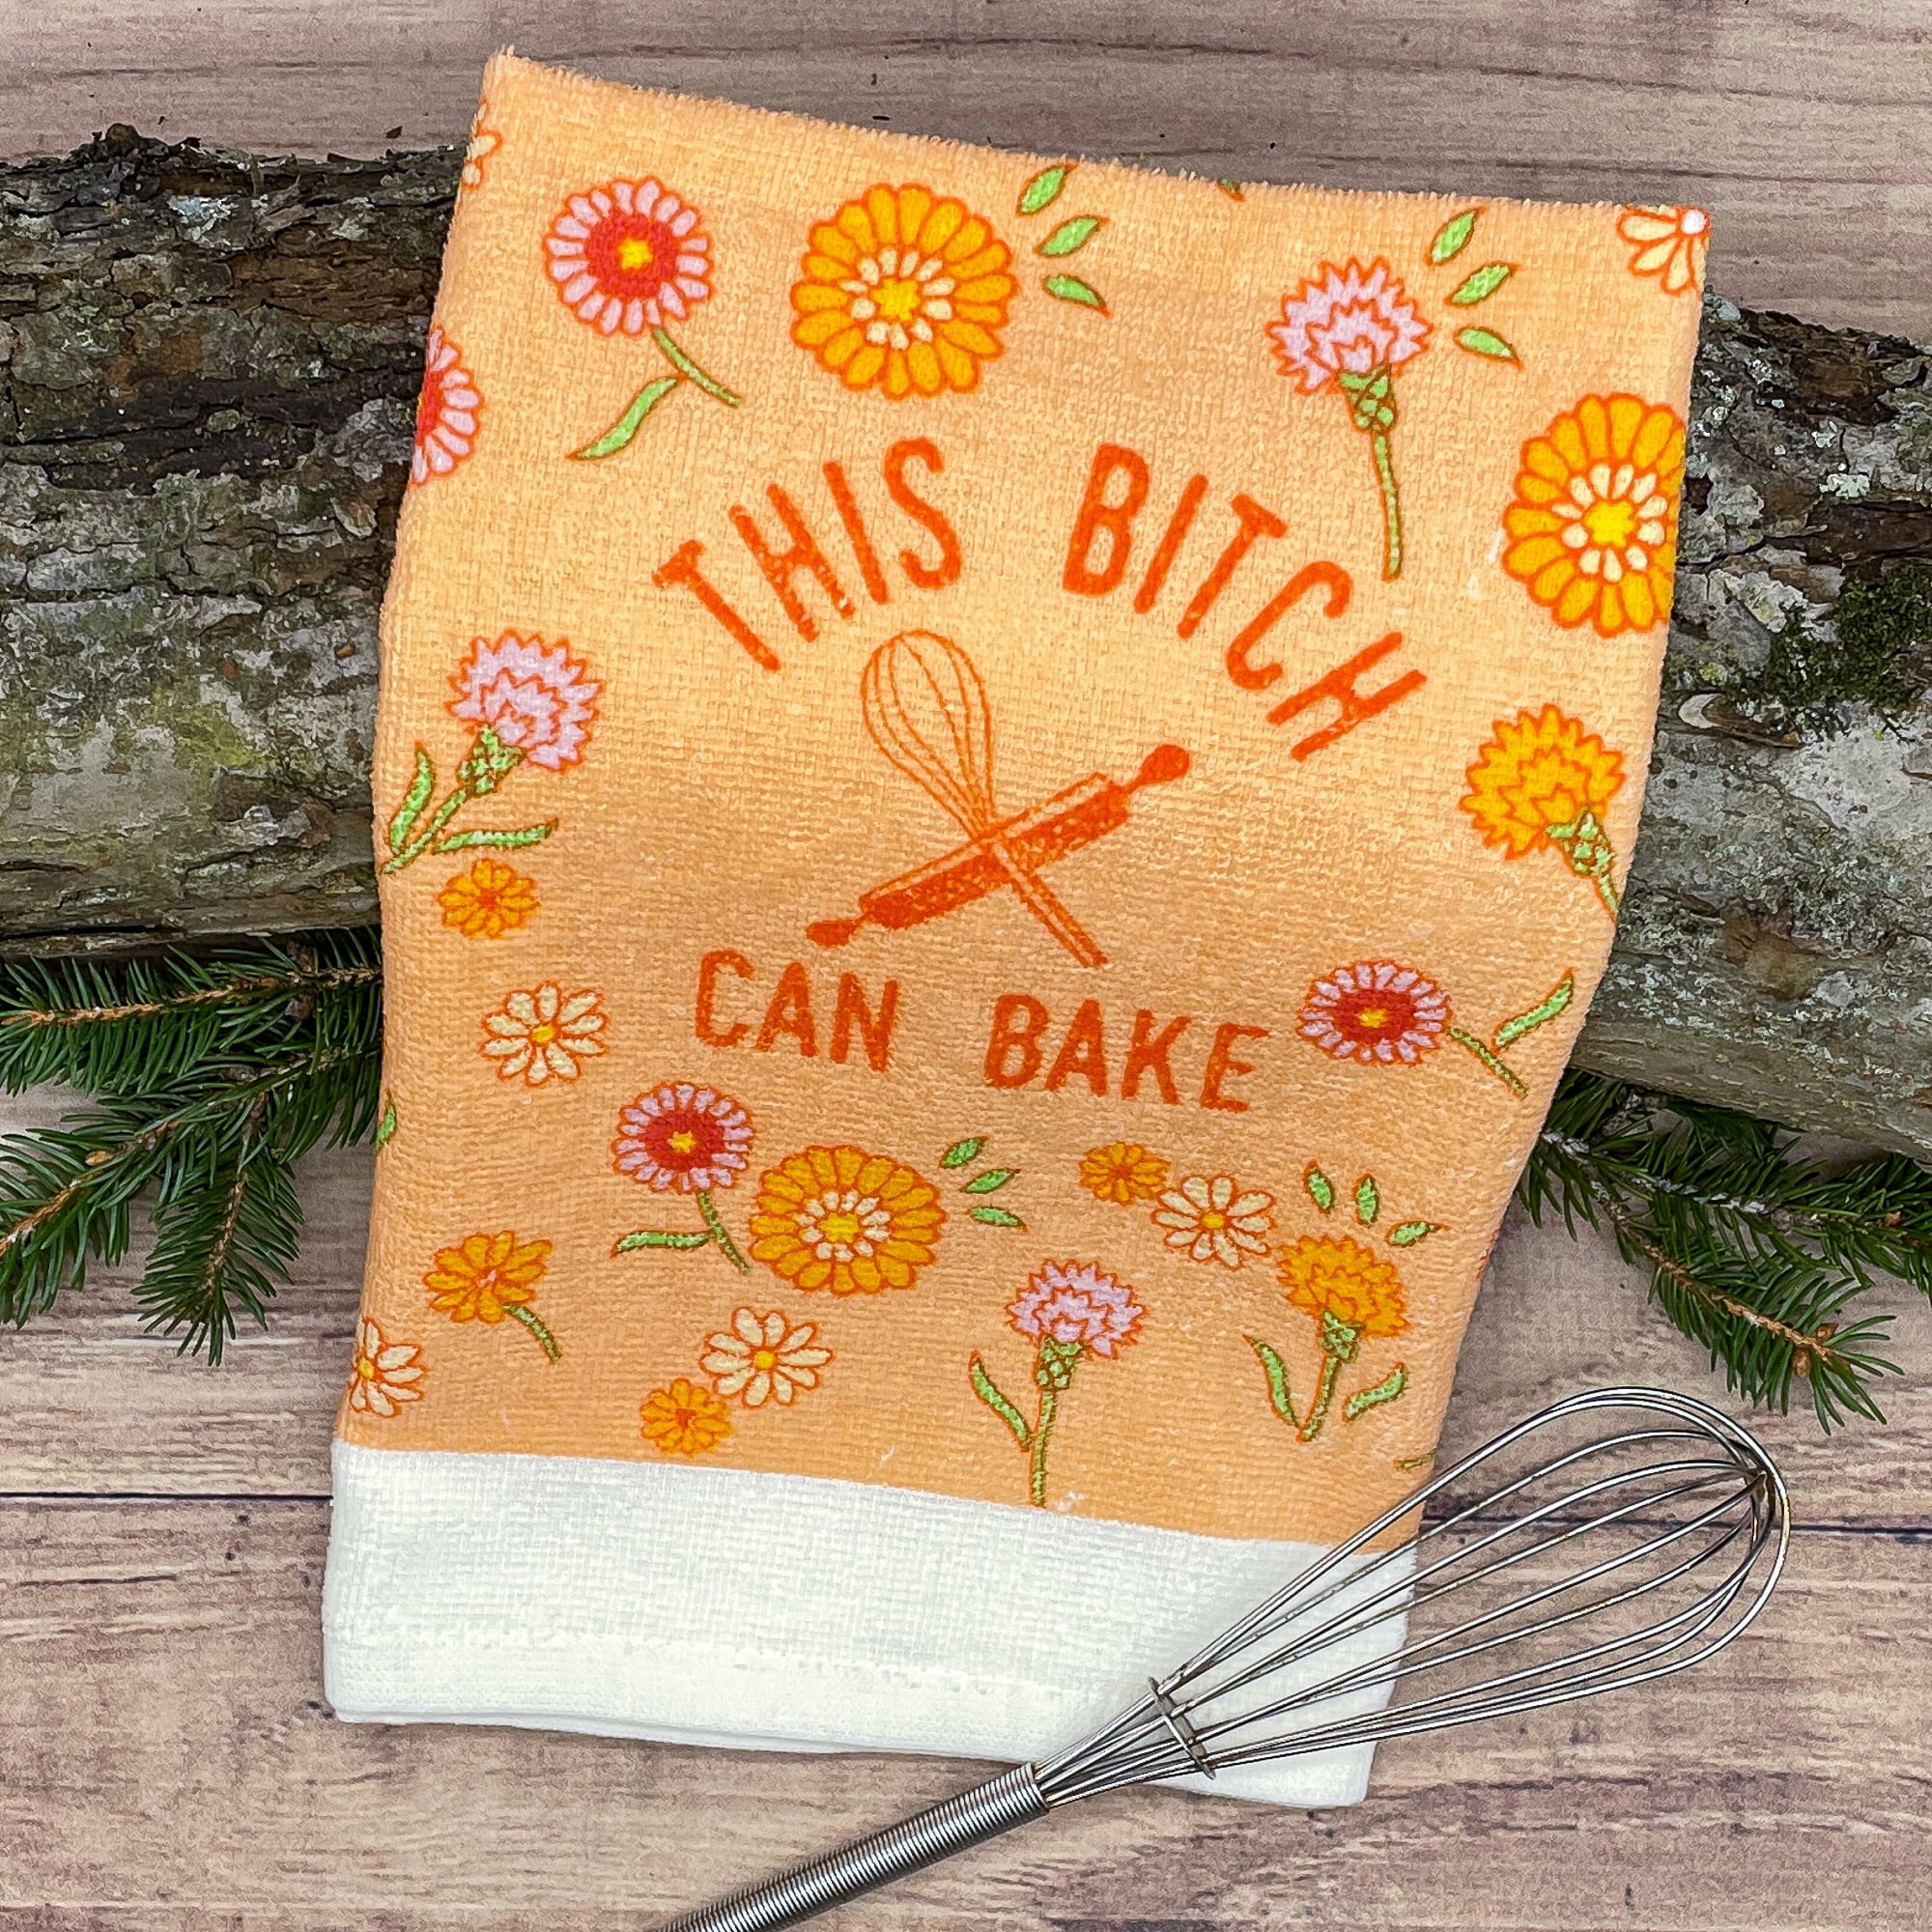 Just Beat It - Funny Kitchen Tea Towel – Canvastry